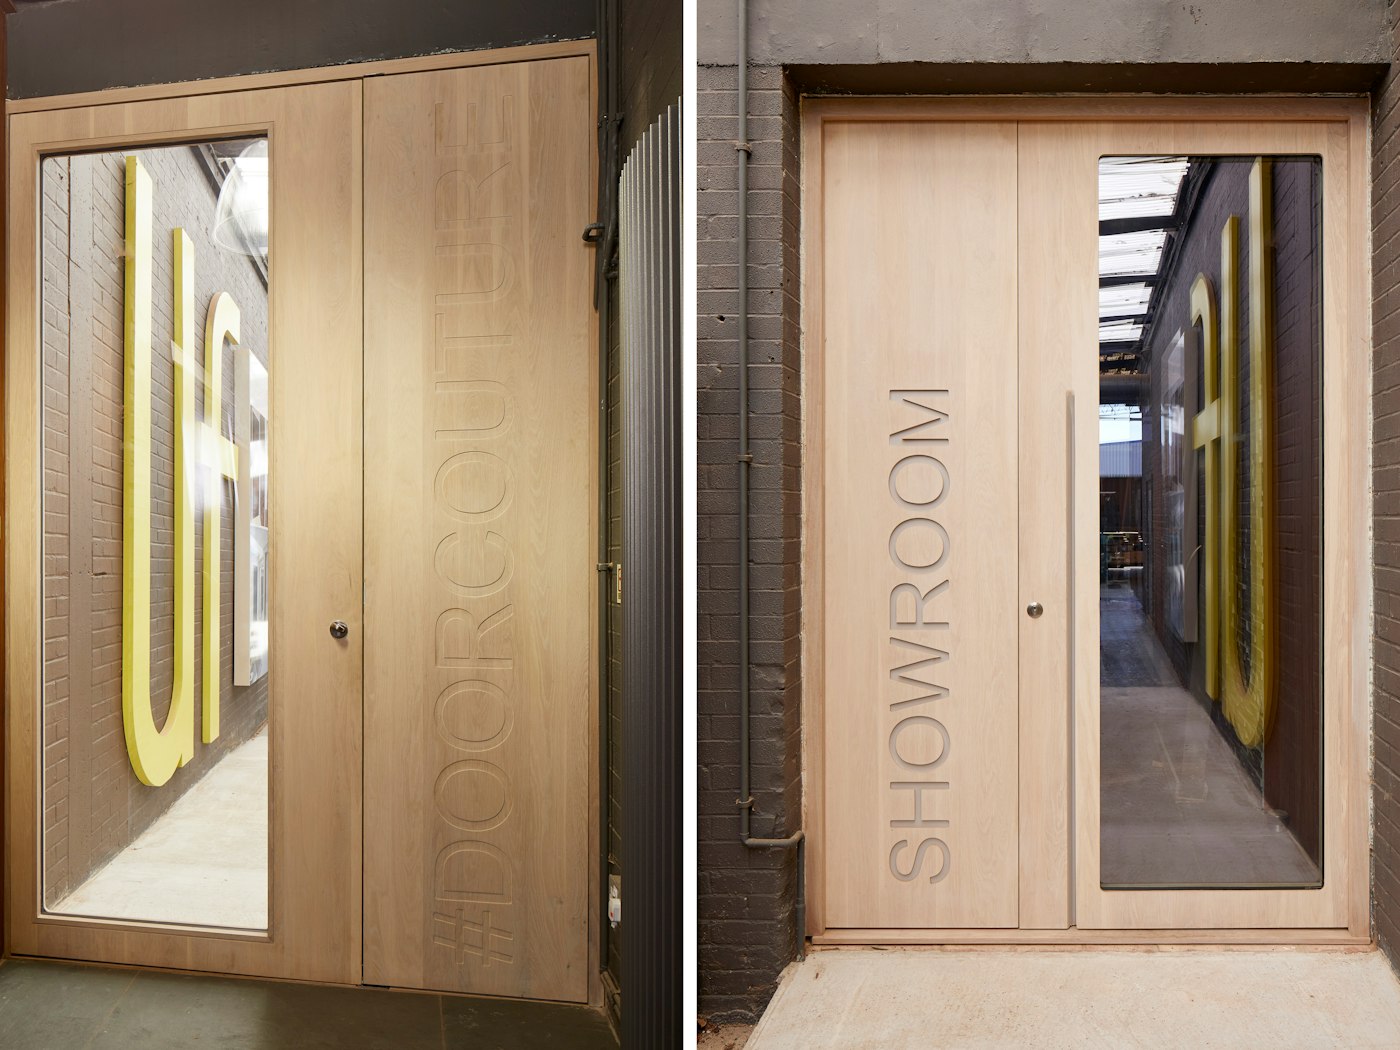 The Urban Front showroom door is a bespoke version of the "Ice" design (created in whitewashed oak with a corian inlay)